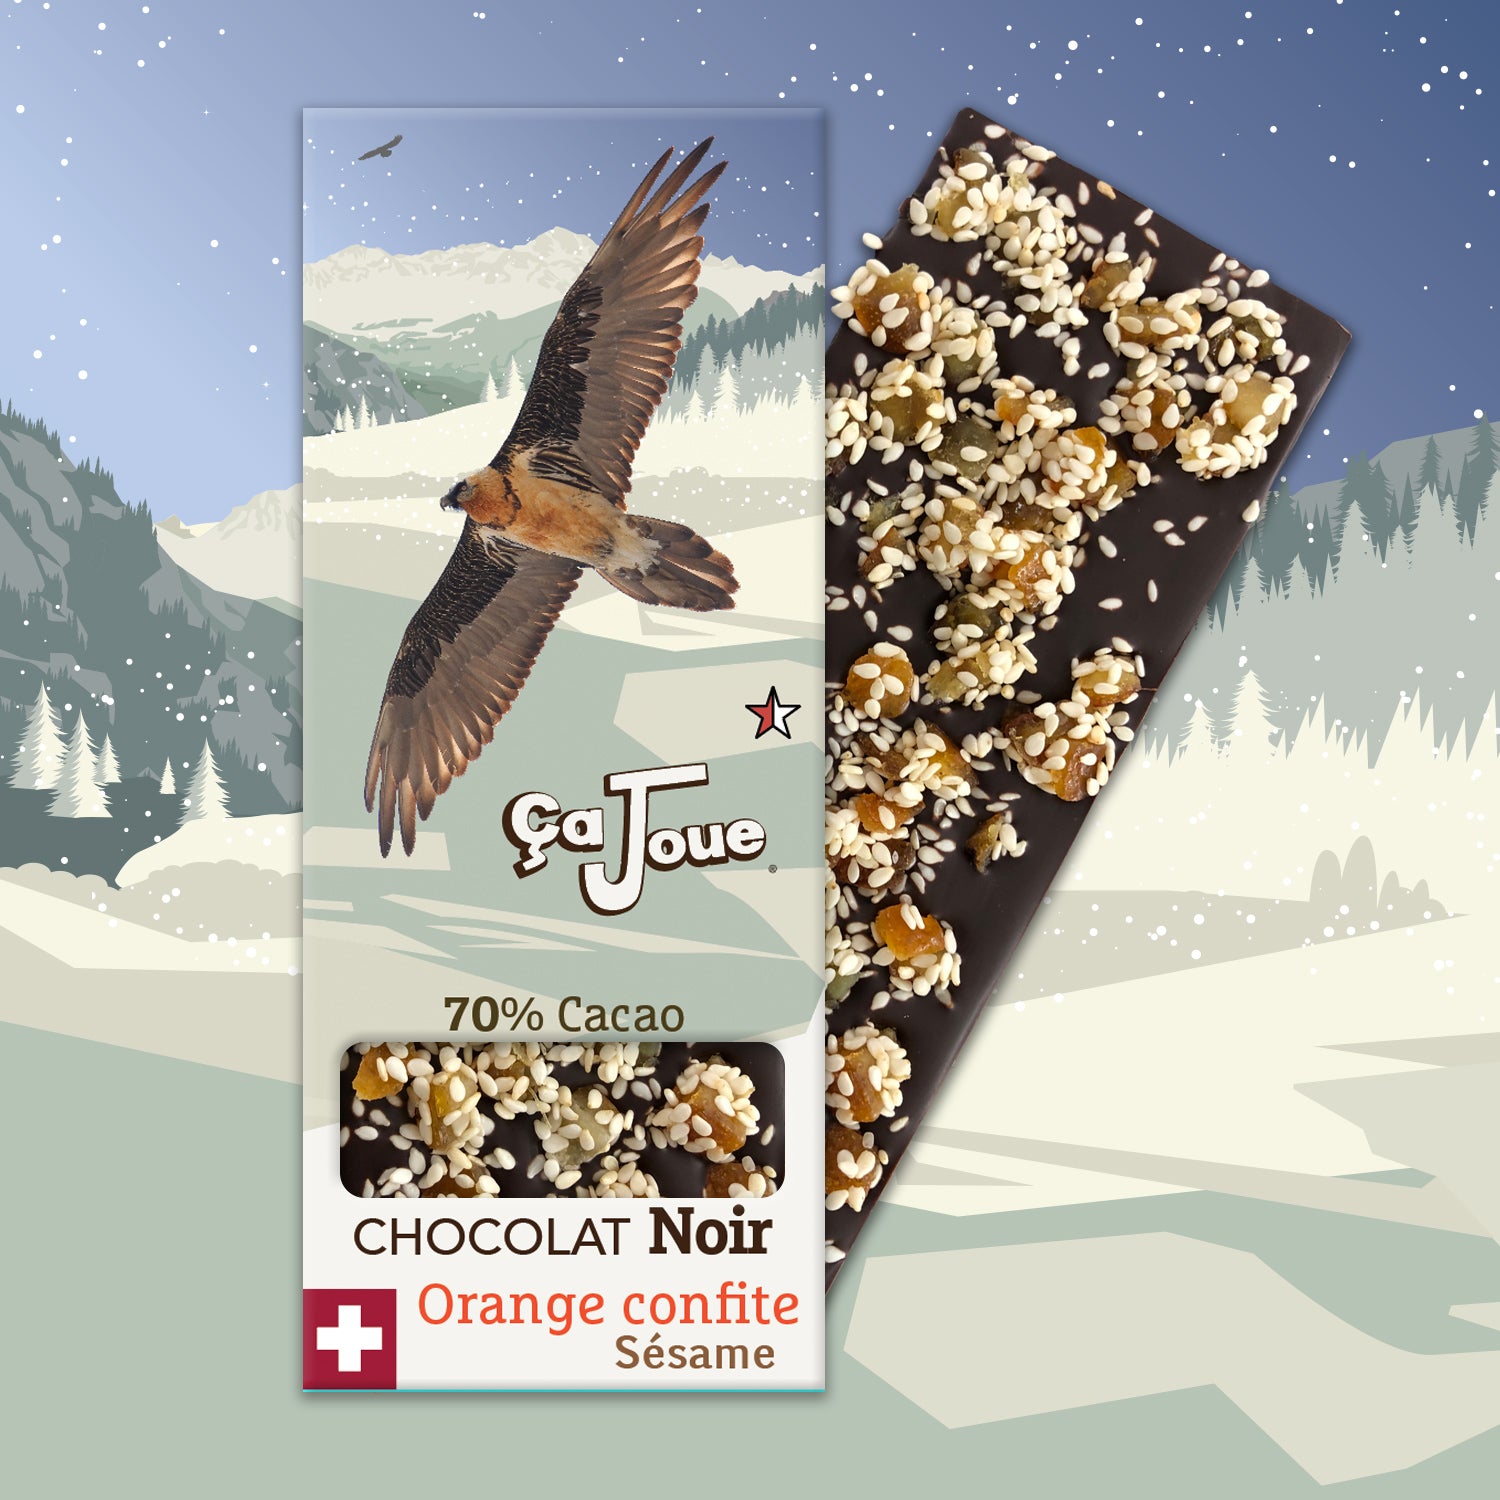 Ça Joue for the Bearded Vultures (Ref-BN7) Chocolate from Val de Bagnes